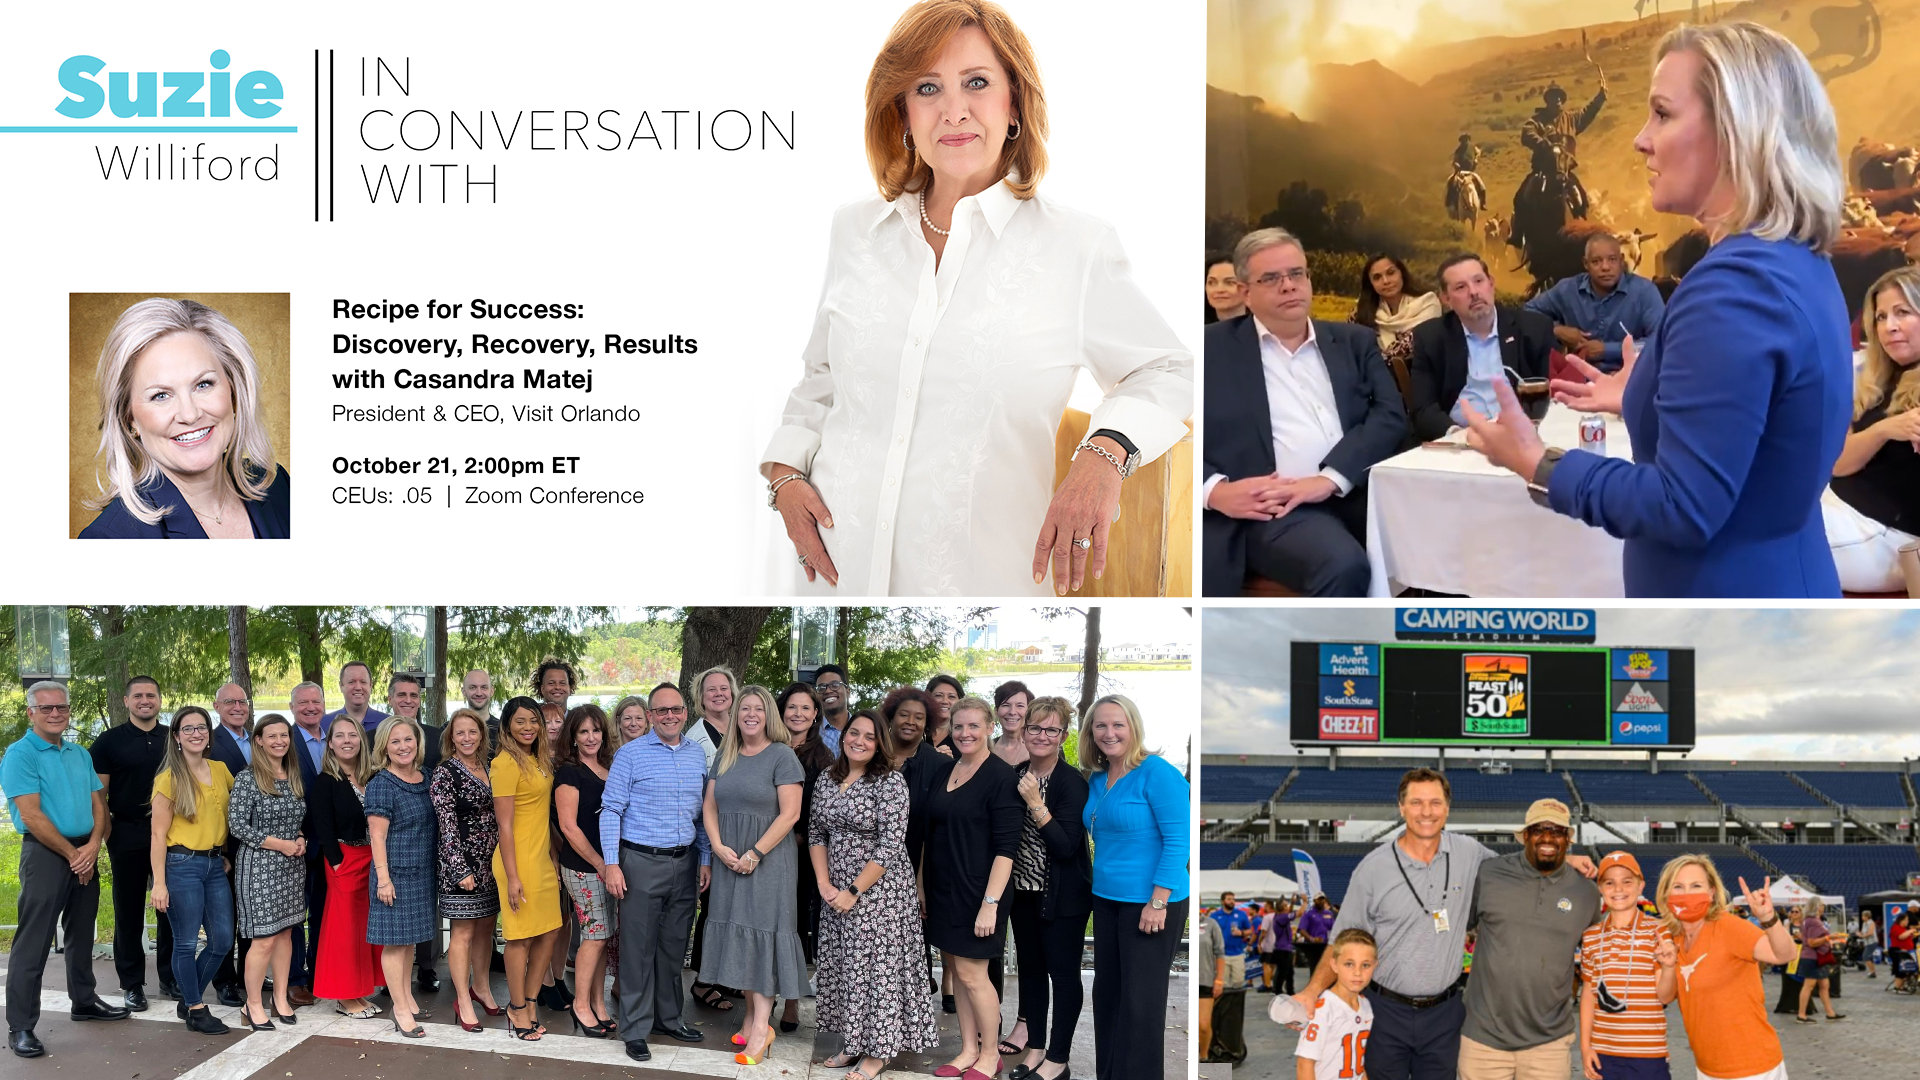 Clockwise from top left: Casandra Matej appeared on “In Conversation with … NKBA’s Suzie Williford"; Casandra speaking to local Orlando Chamber presidents; Visit Orlando's Milestone lunch; Casandra and her son John join Steve Hogan at Feast on the 50.